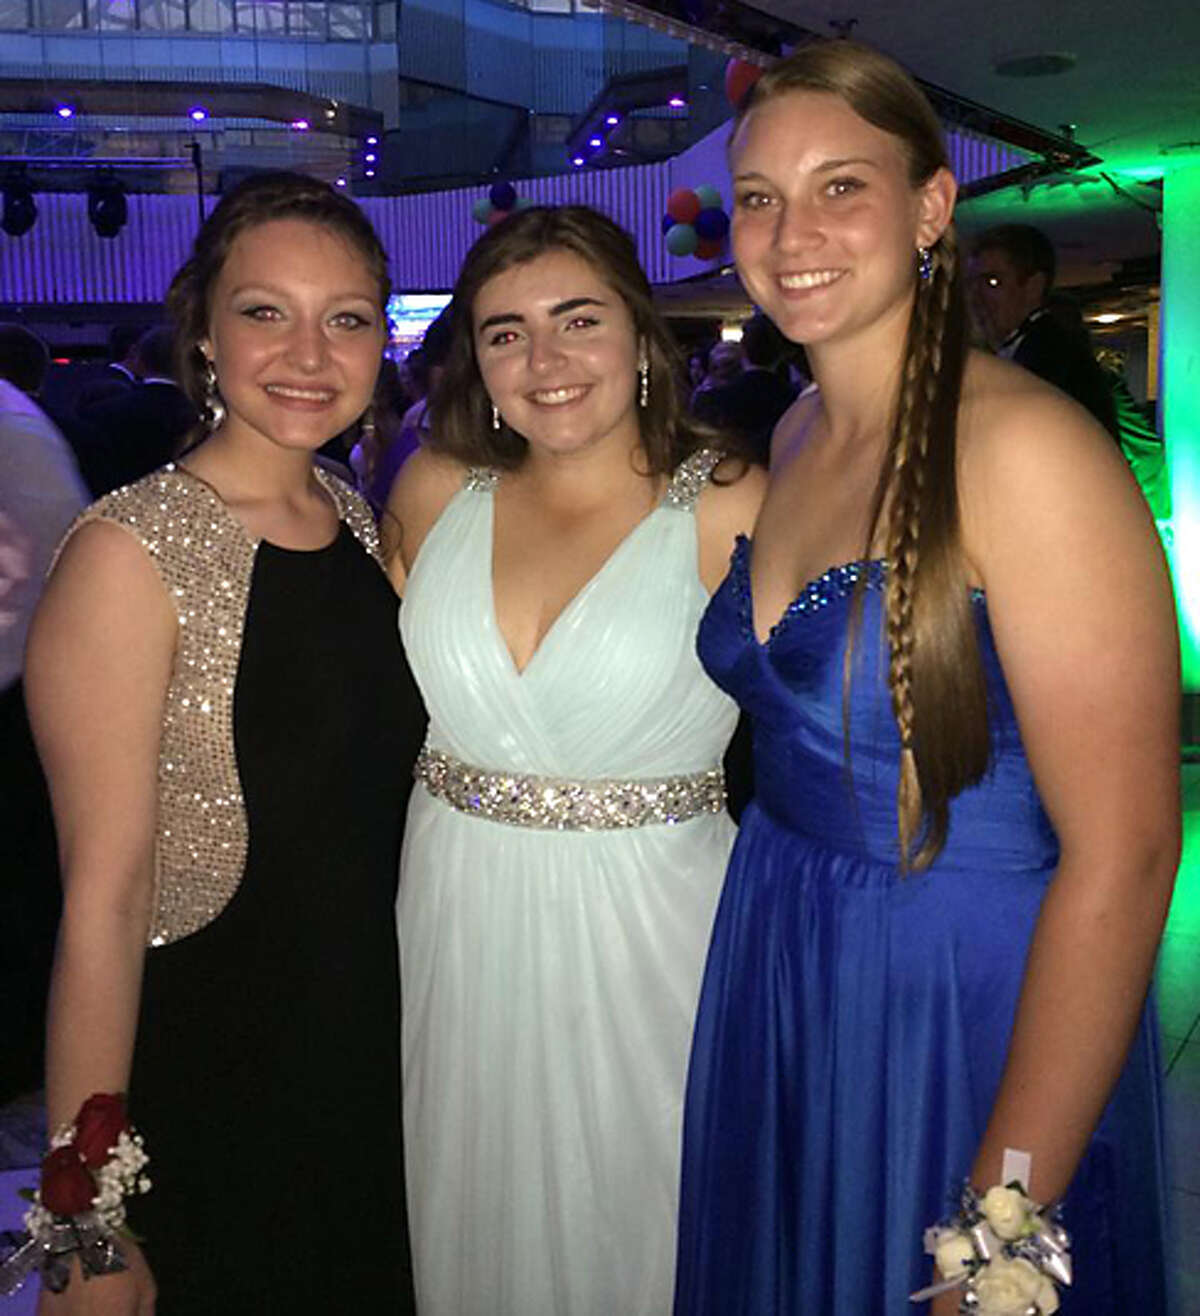 Trumbull High School celebrated their prom Friday, May 30 at The Matrix Corporate Center in Danbury.